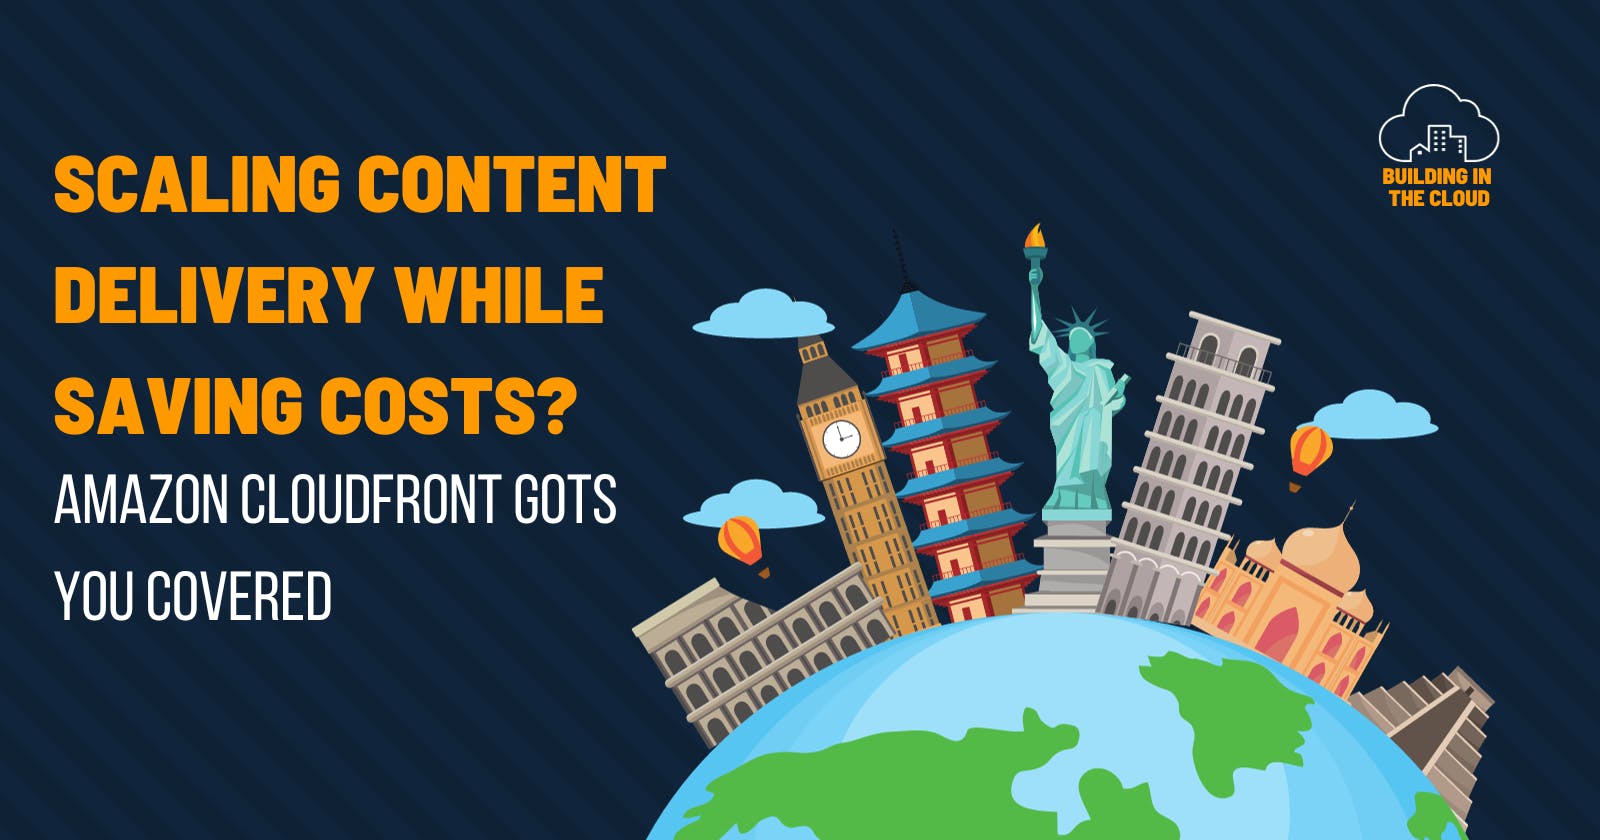 Scaling content delivery while saving costs?